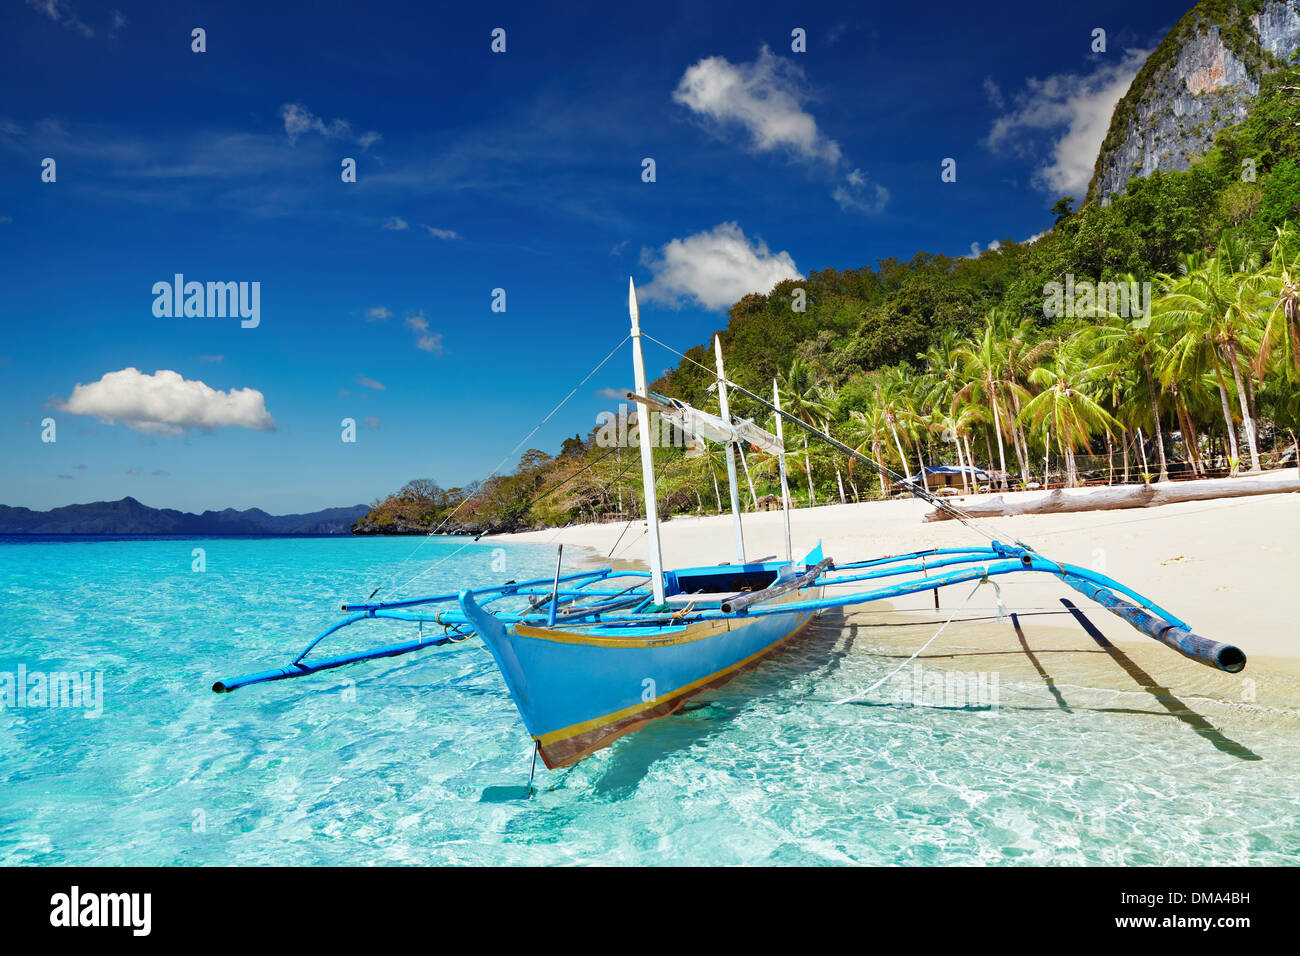 Tropical Beach, South China Voir, El-Nido, Philippines Banque D'Images